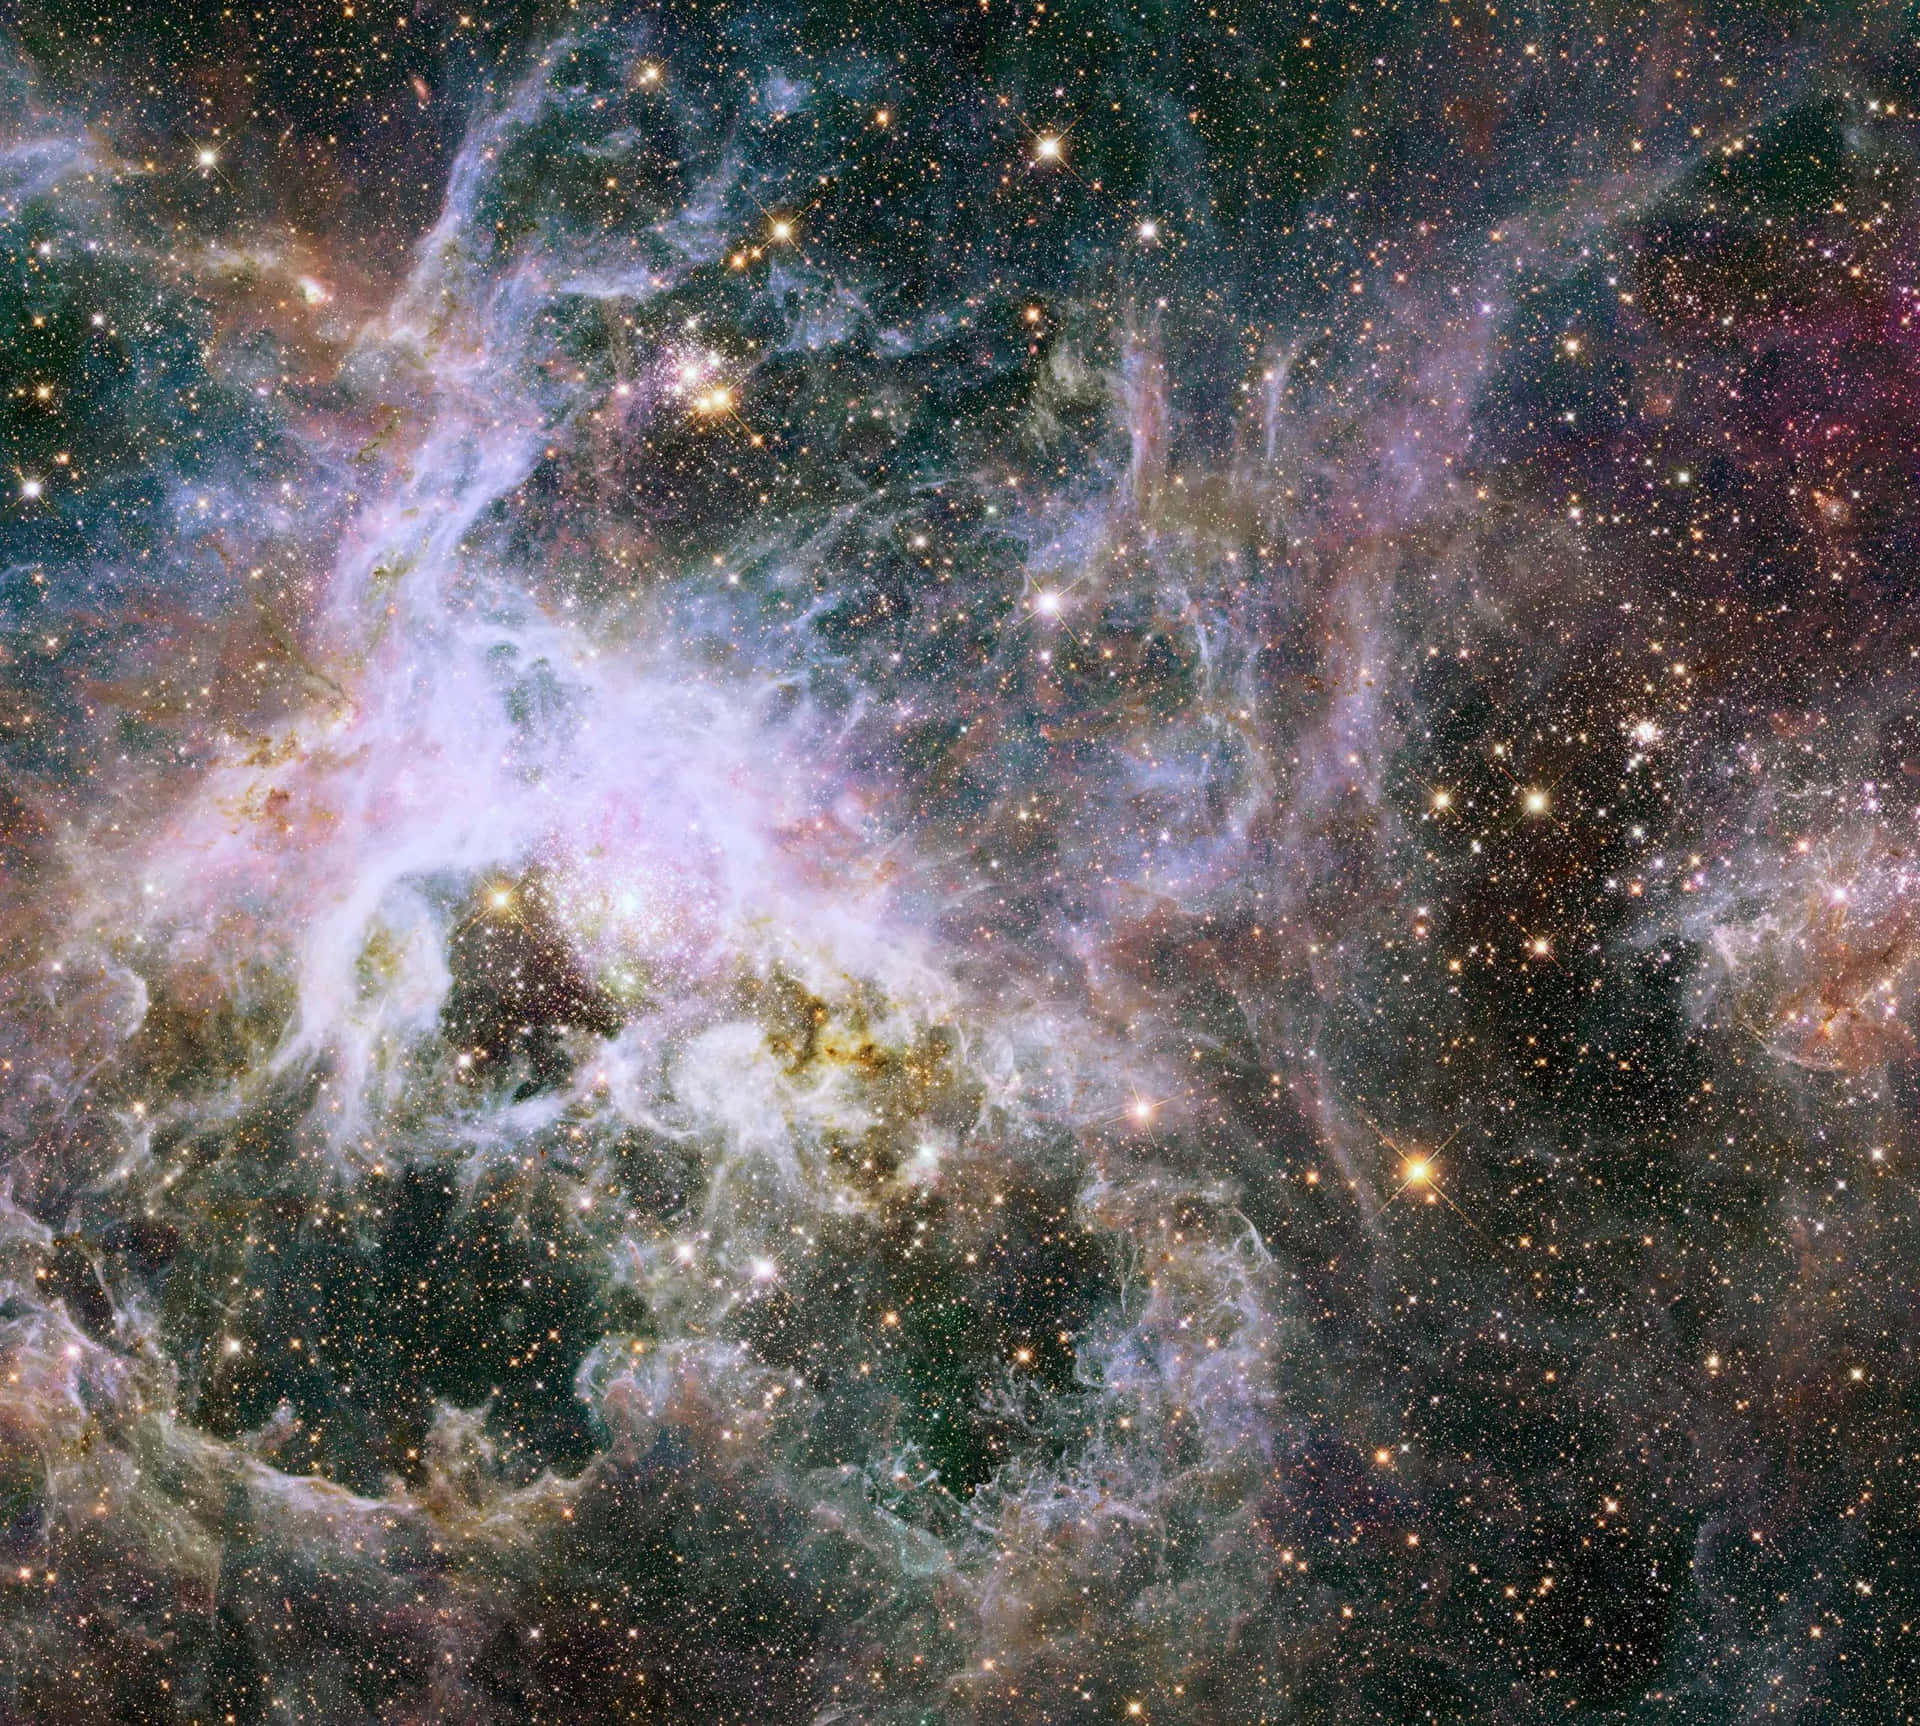 The Nebula Is Surrounded By Stars And Stars